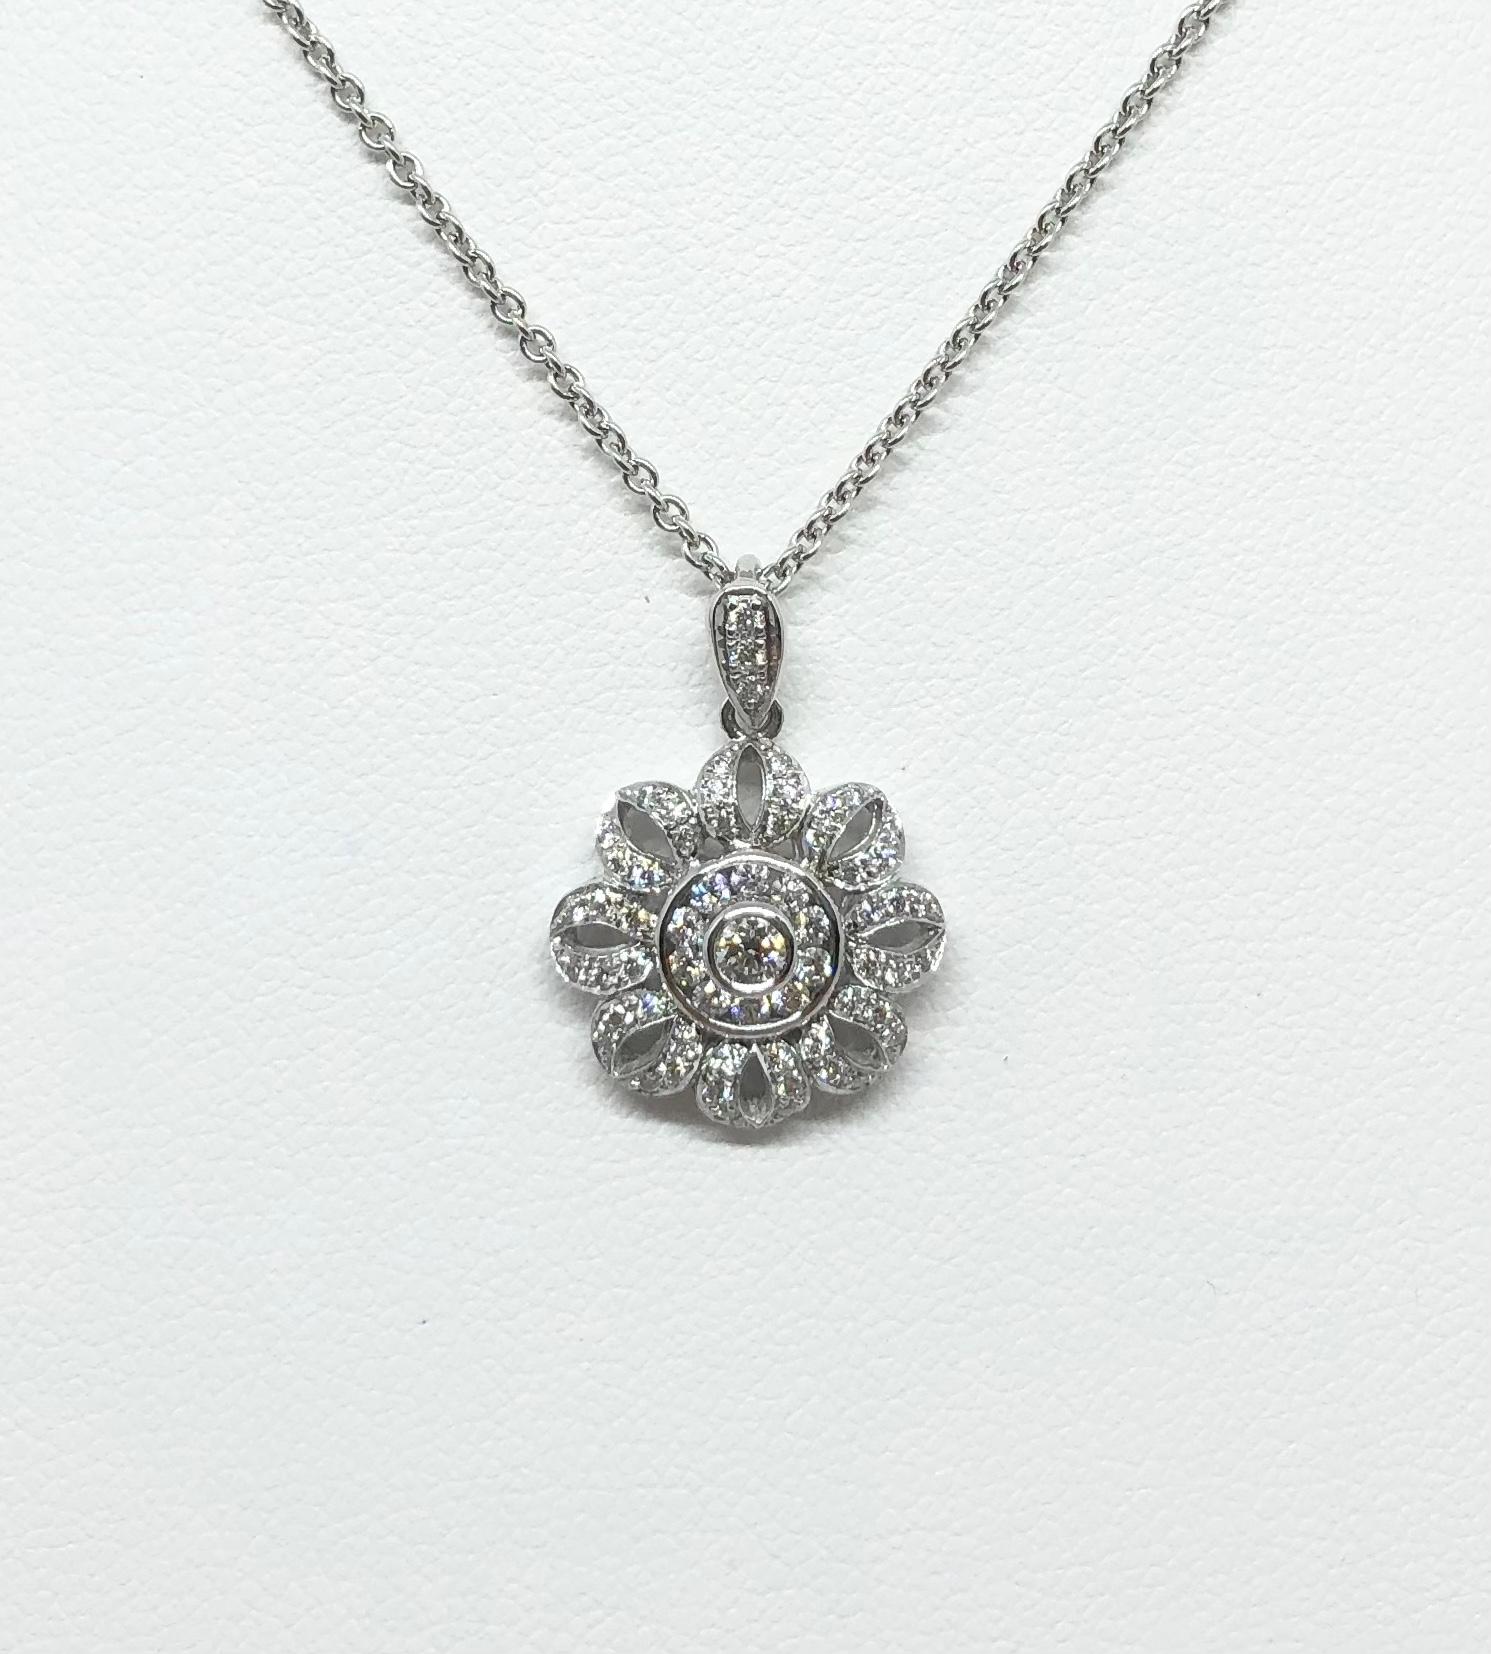 Diamond 0.34 carat Pendant set in 18 Karat White Gold Settings
(chain not included)

Width: 1.3 cm 
Length: 2.0 cm
Total Weight: 2.03 grams

